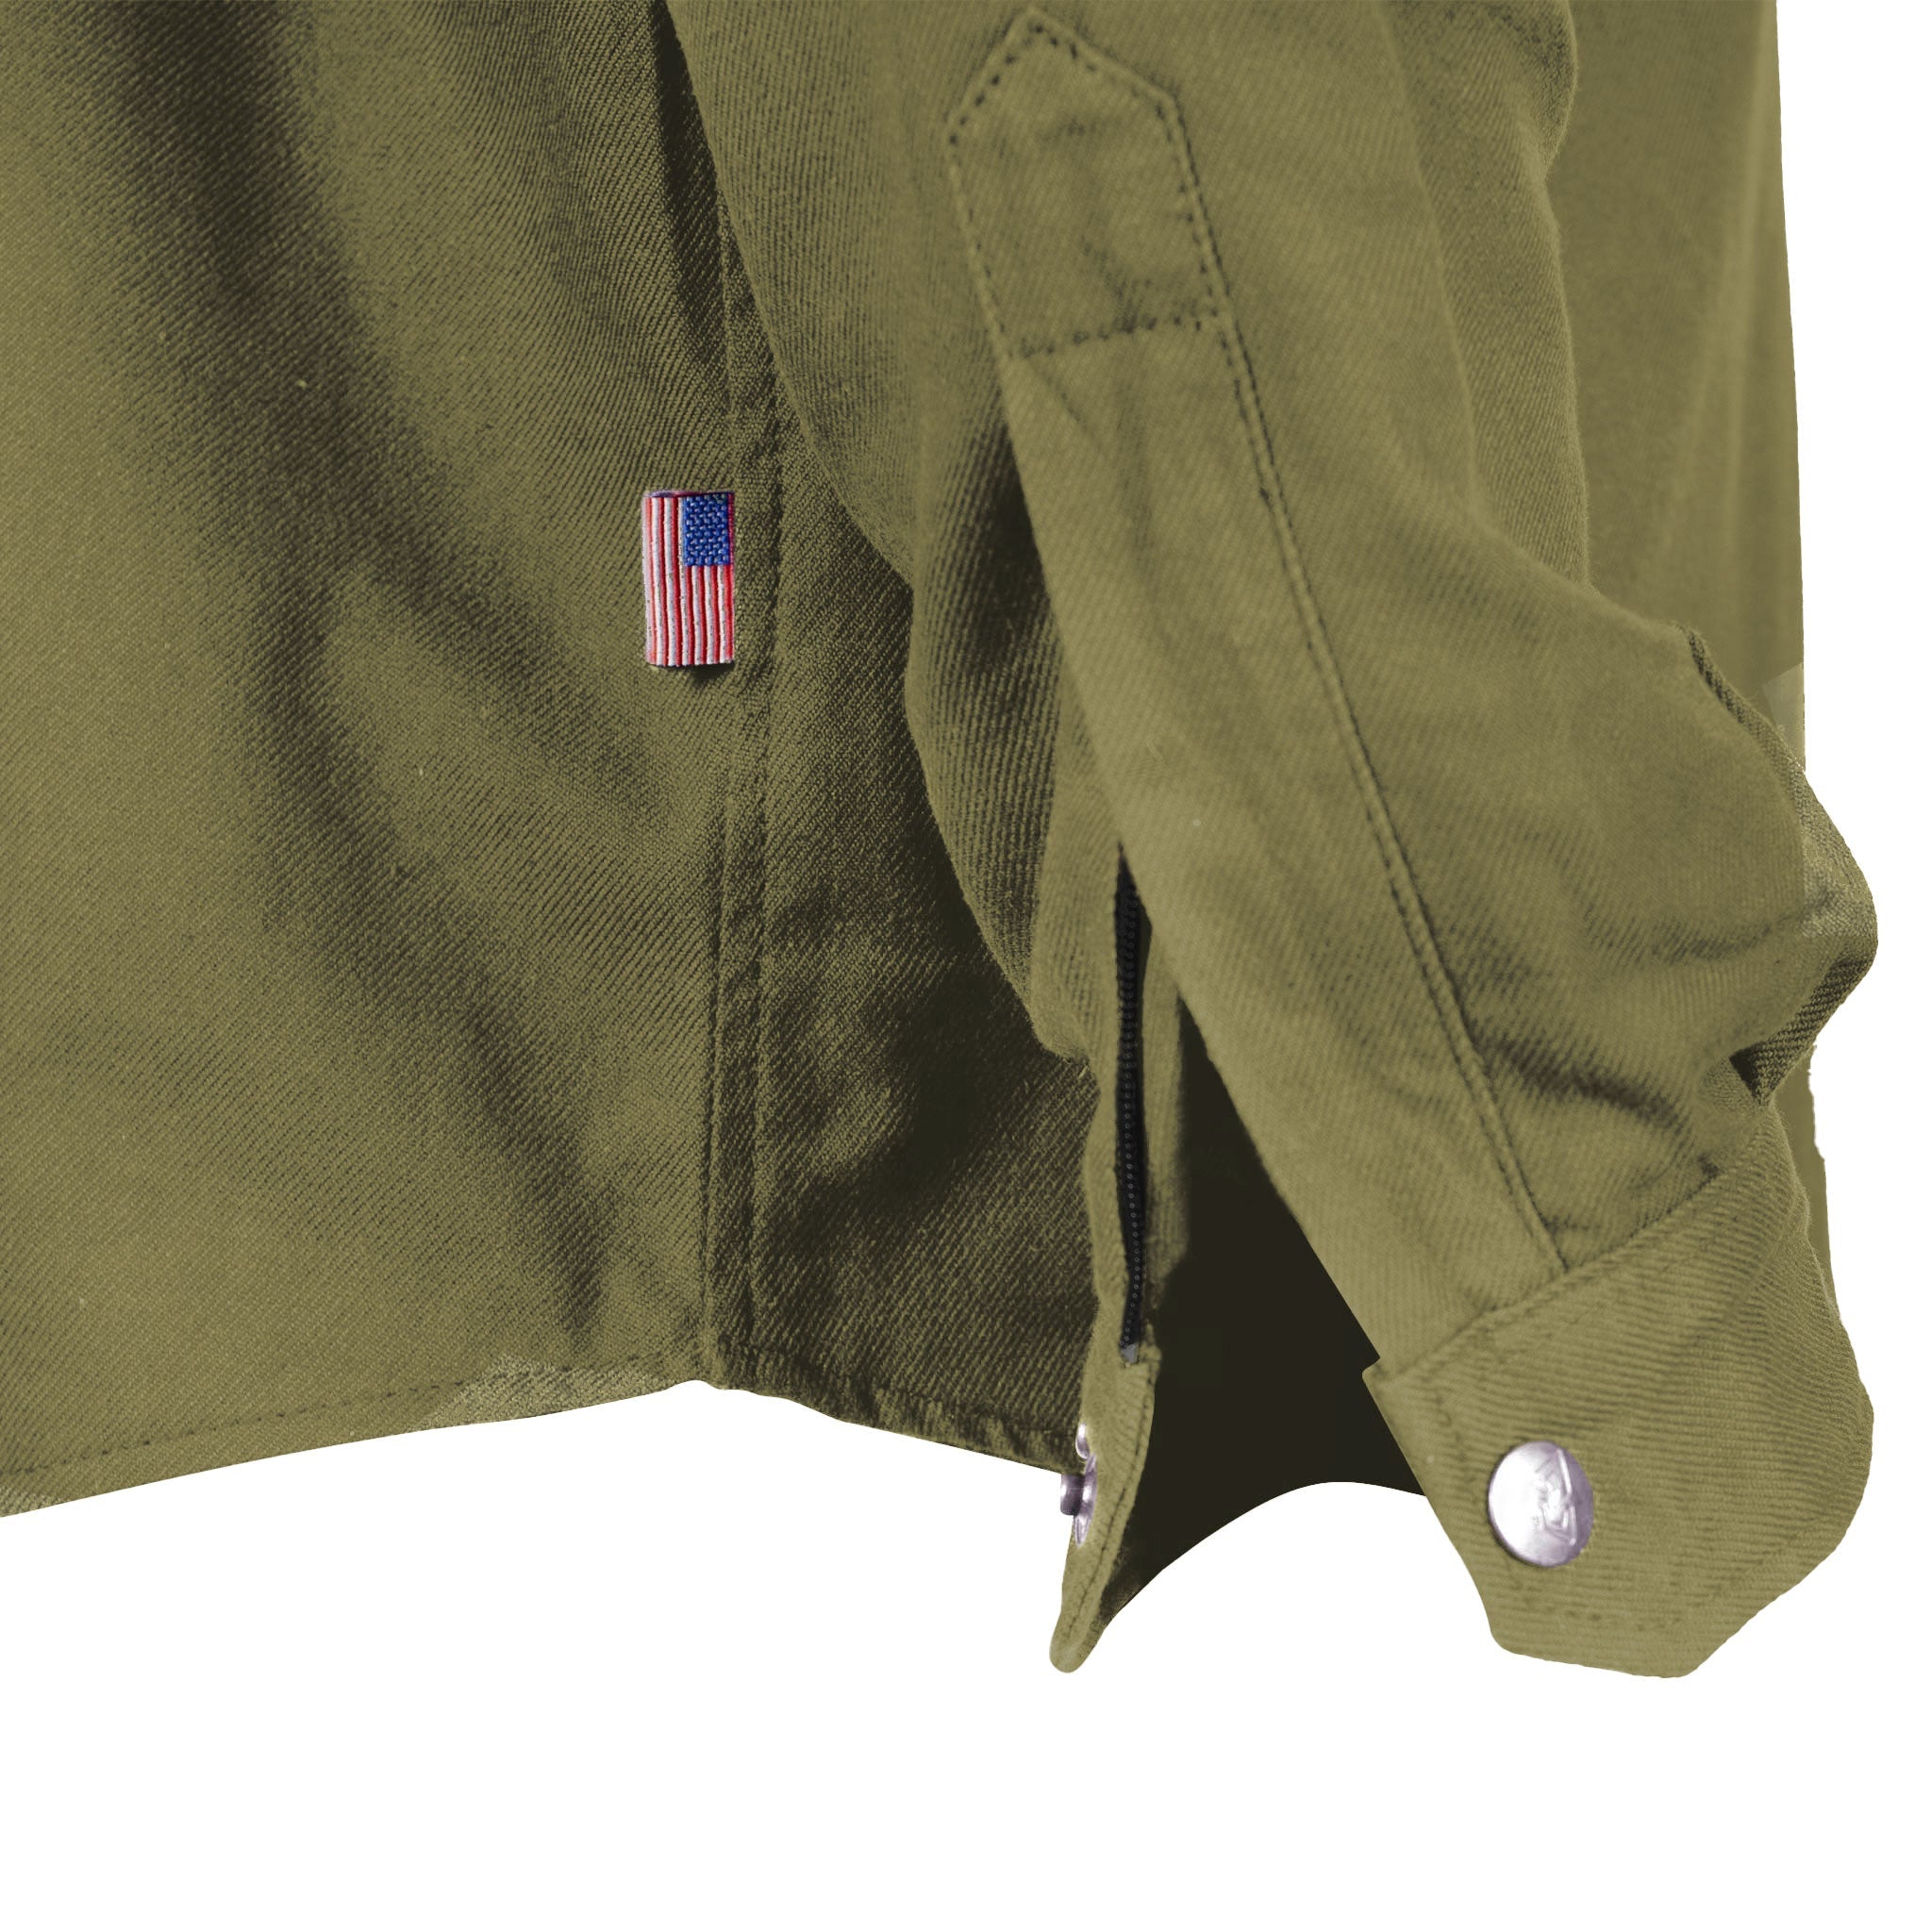 SALE Protective Flannel Shirt - Army Green Solid with Pads